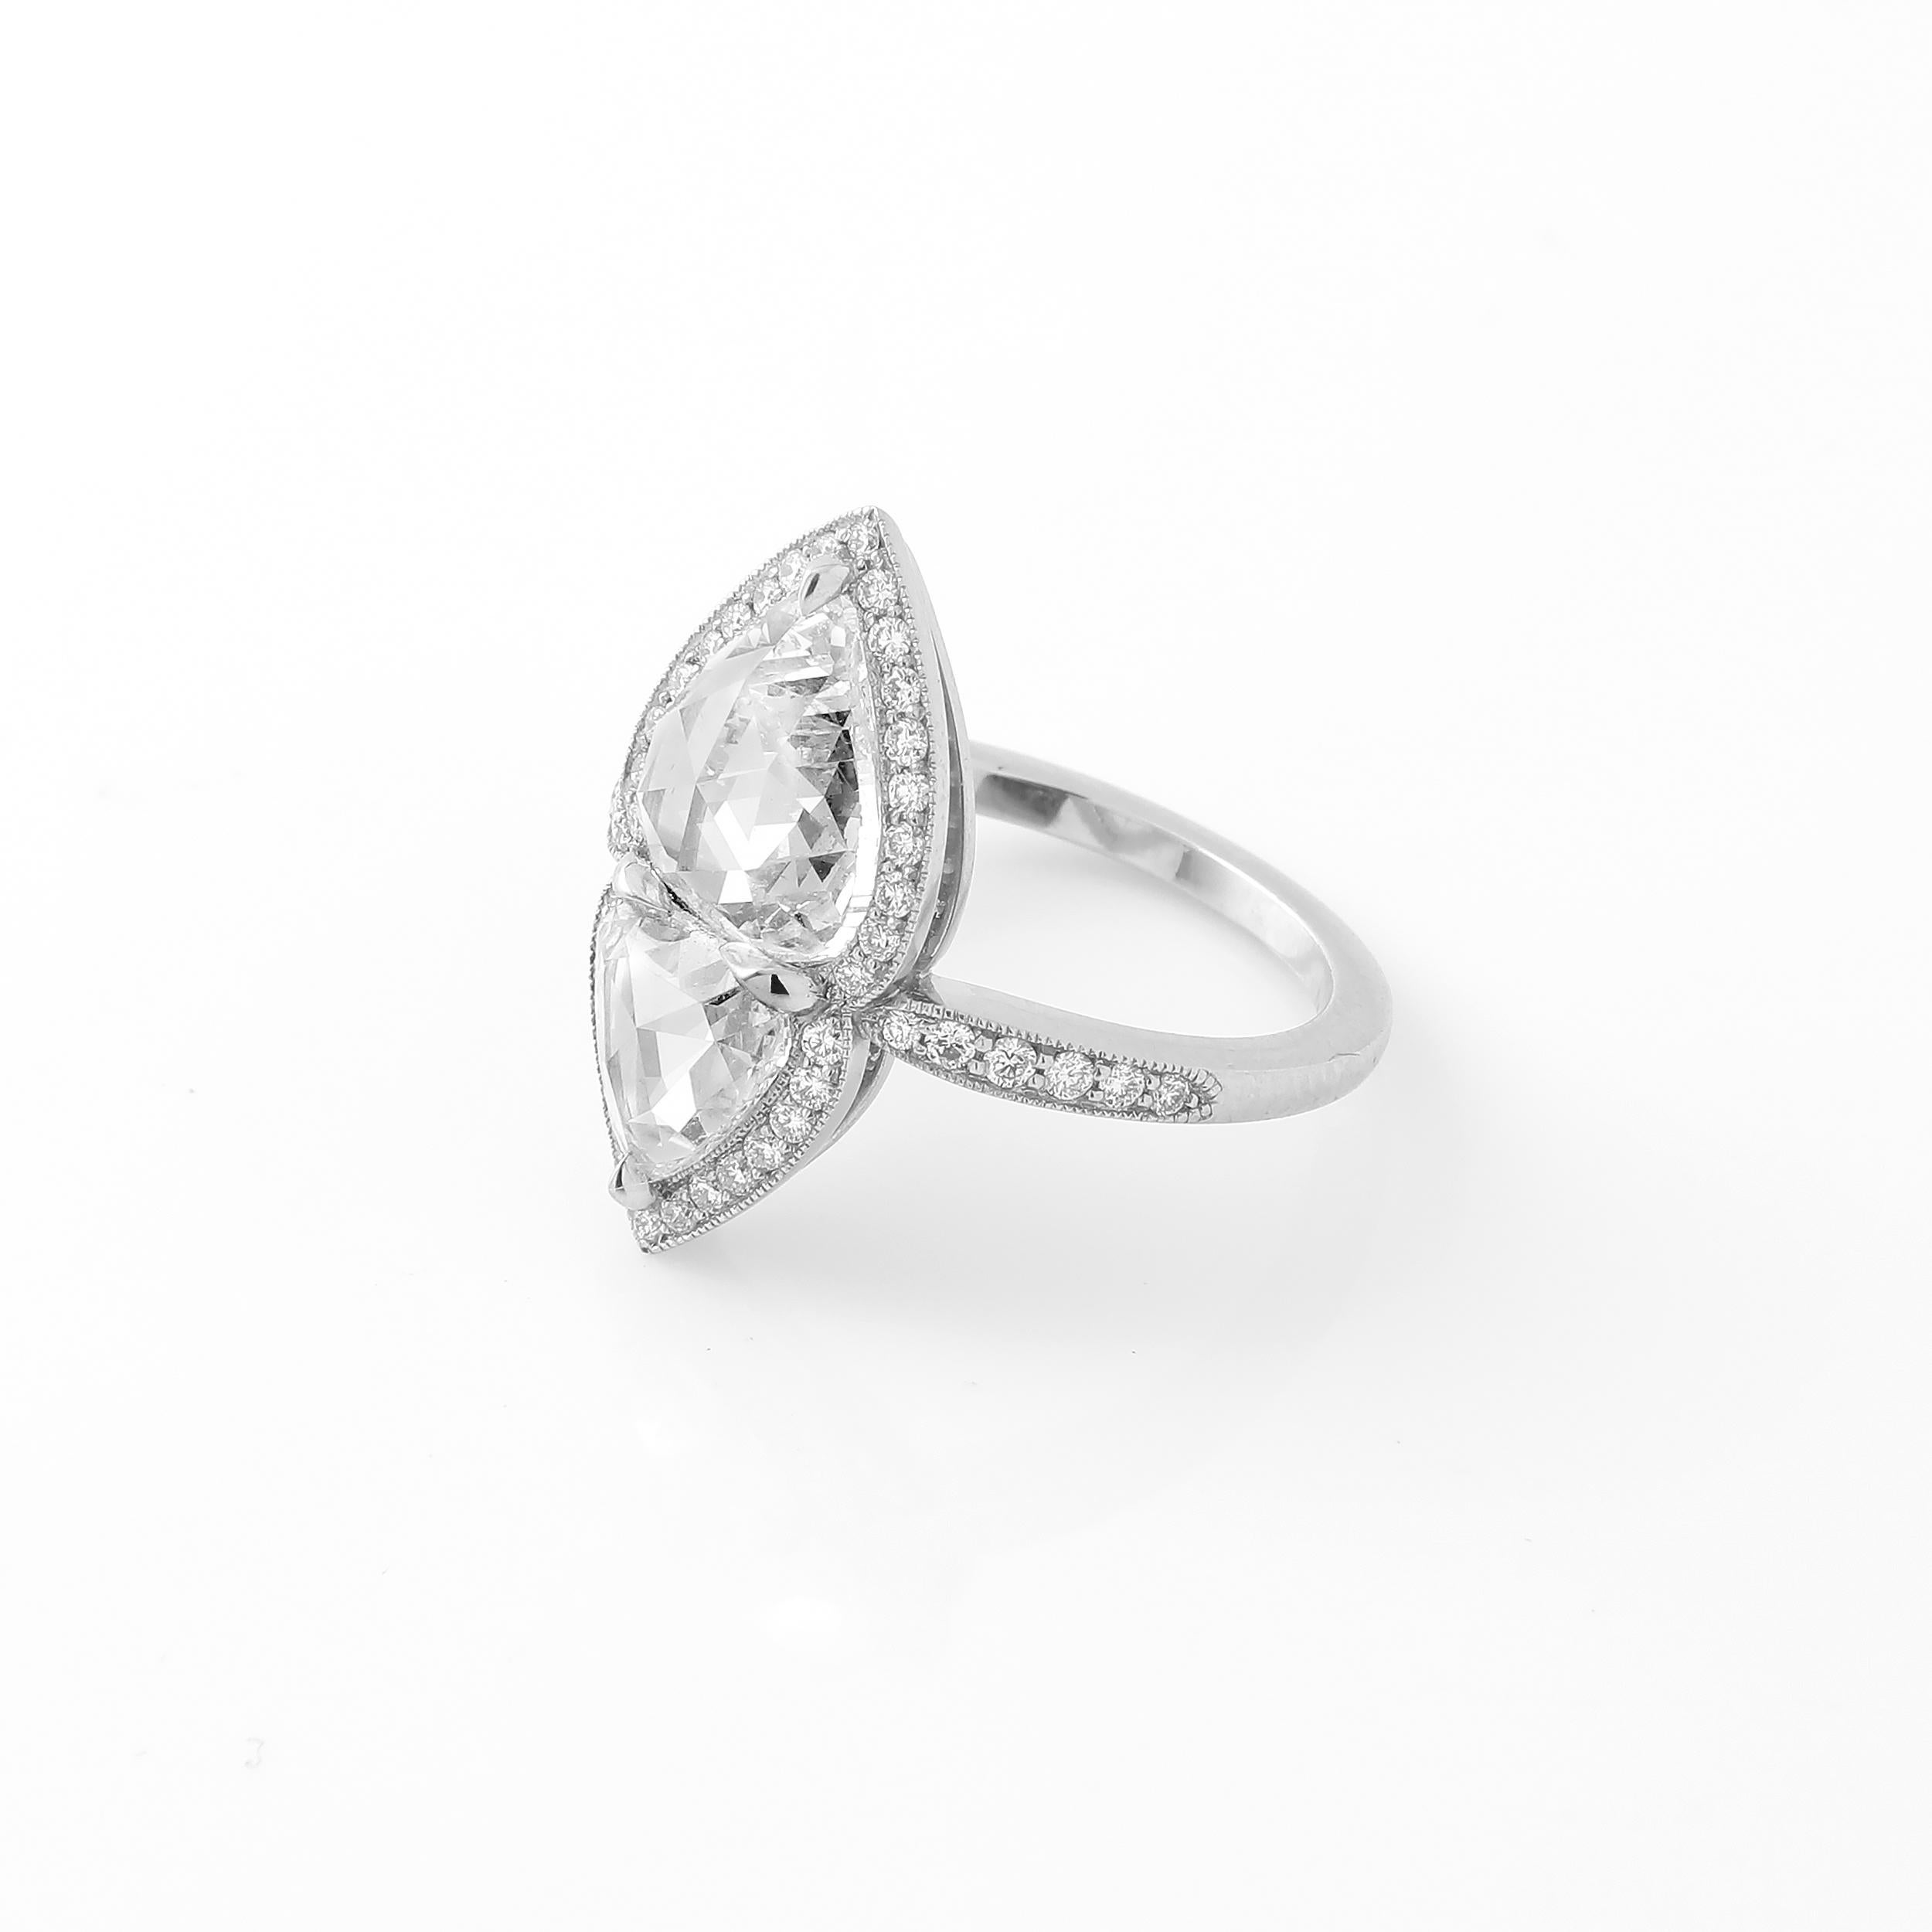 This super unique twin stone or 'Toi et Moi' ring features a pair of rose cut pear shape diamonds weighing 2.32 carats and 0.94 carats. The diamonds 100% natural and approximately G to H color and VS/SI clarity. The stones are set in a beautiful